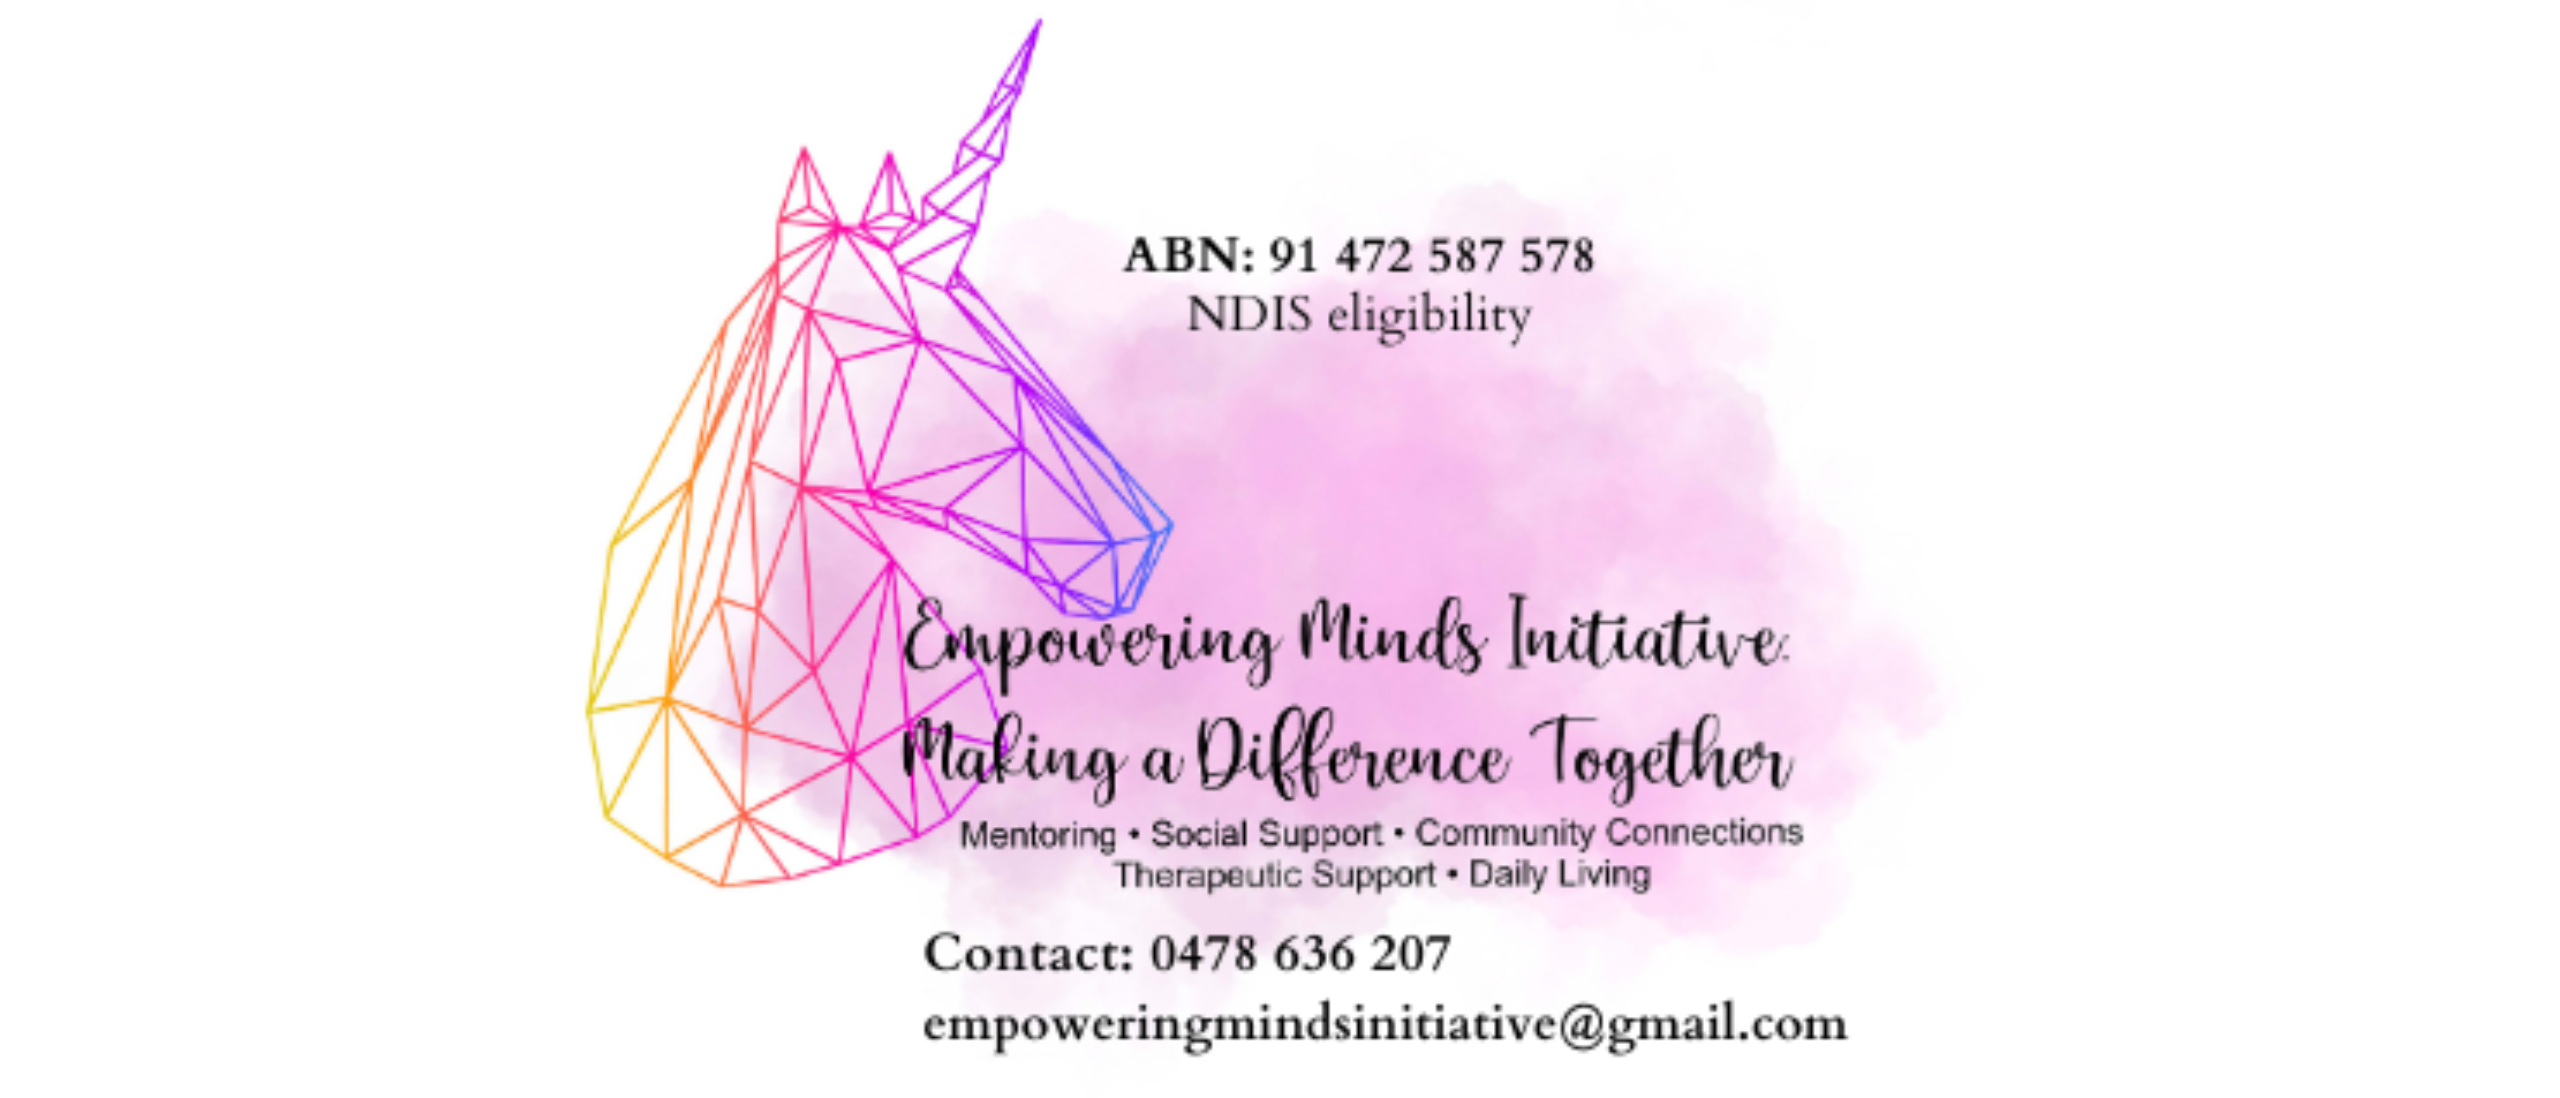 Empowering minds initiative